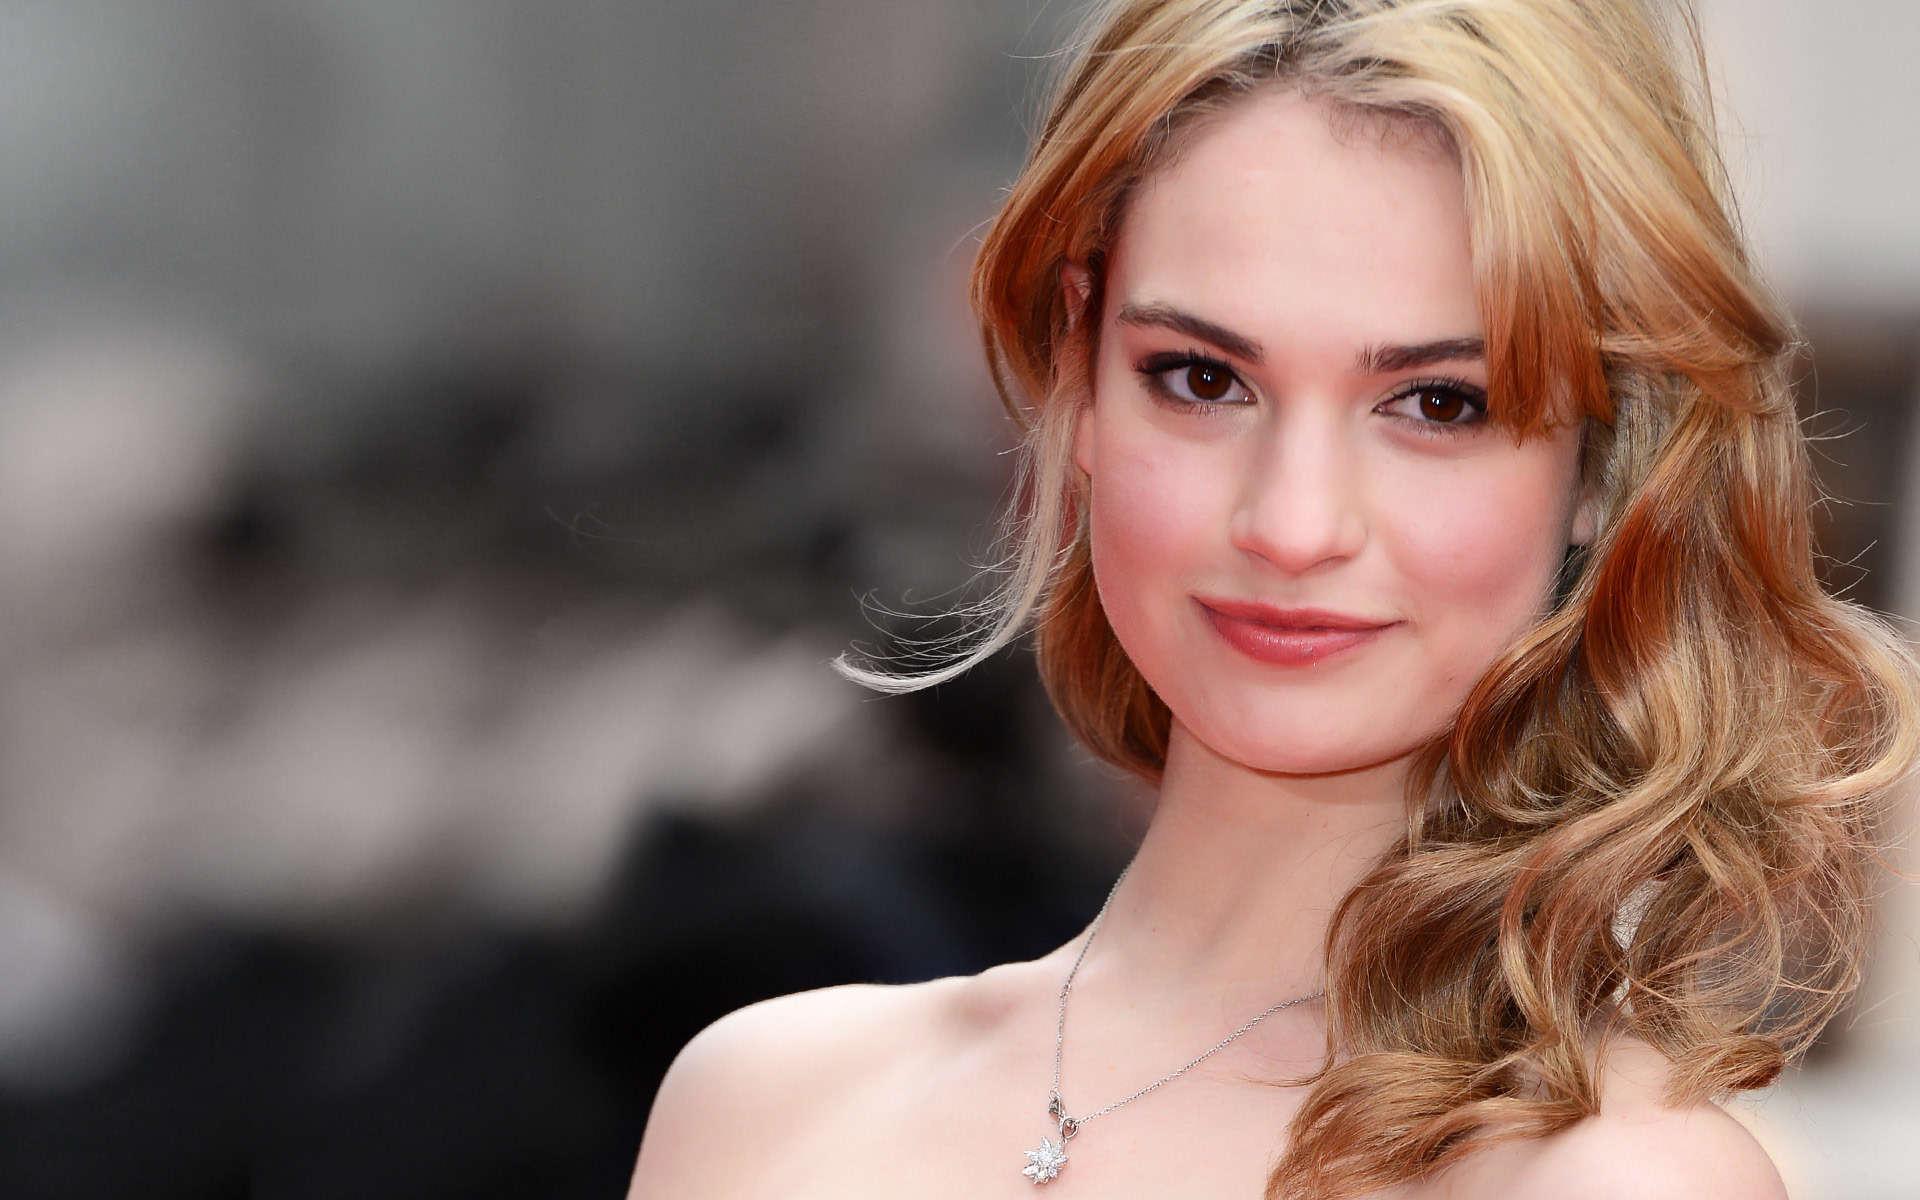 Lily James Wallpaper High Resolution and Quality Download